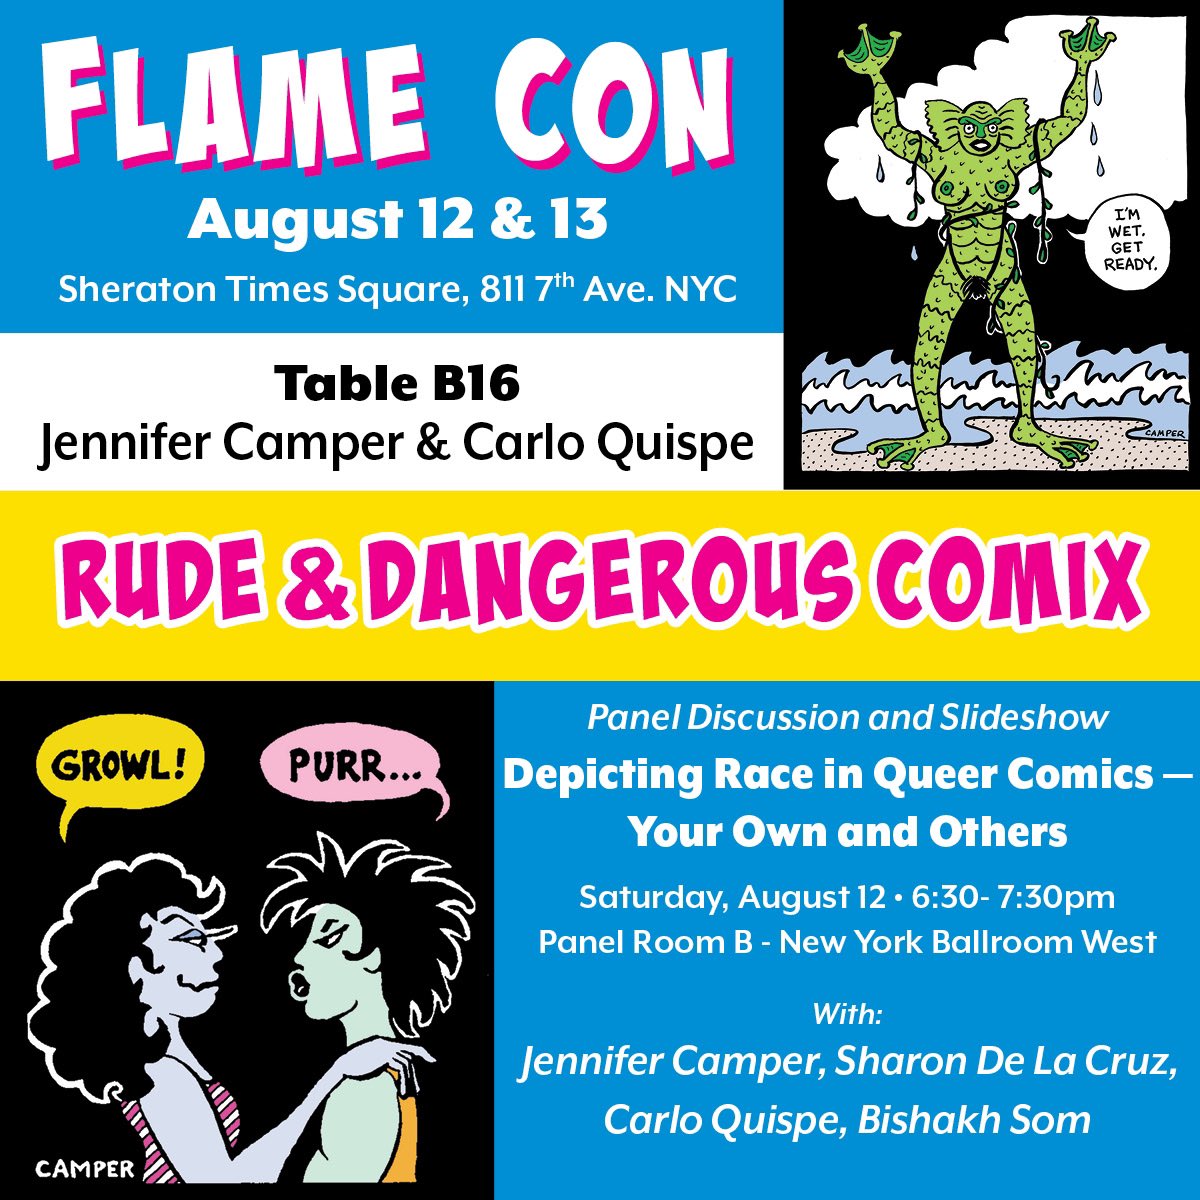 All the banned comics and more! Join us at @FlameCon this weekend. Table B16 with @UranusComics Carlo Quispe. Our panel is on Sat at 6:30 pm with Bishakh Som, Carlo Quispe, & Sharon de le Cruz.